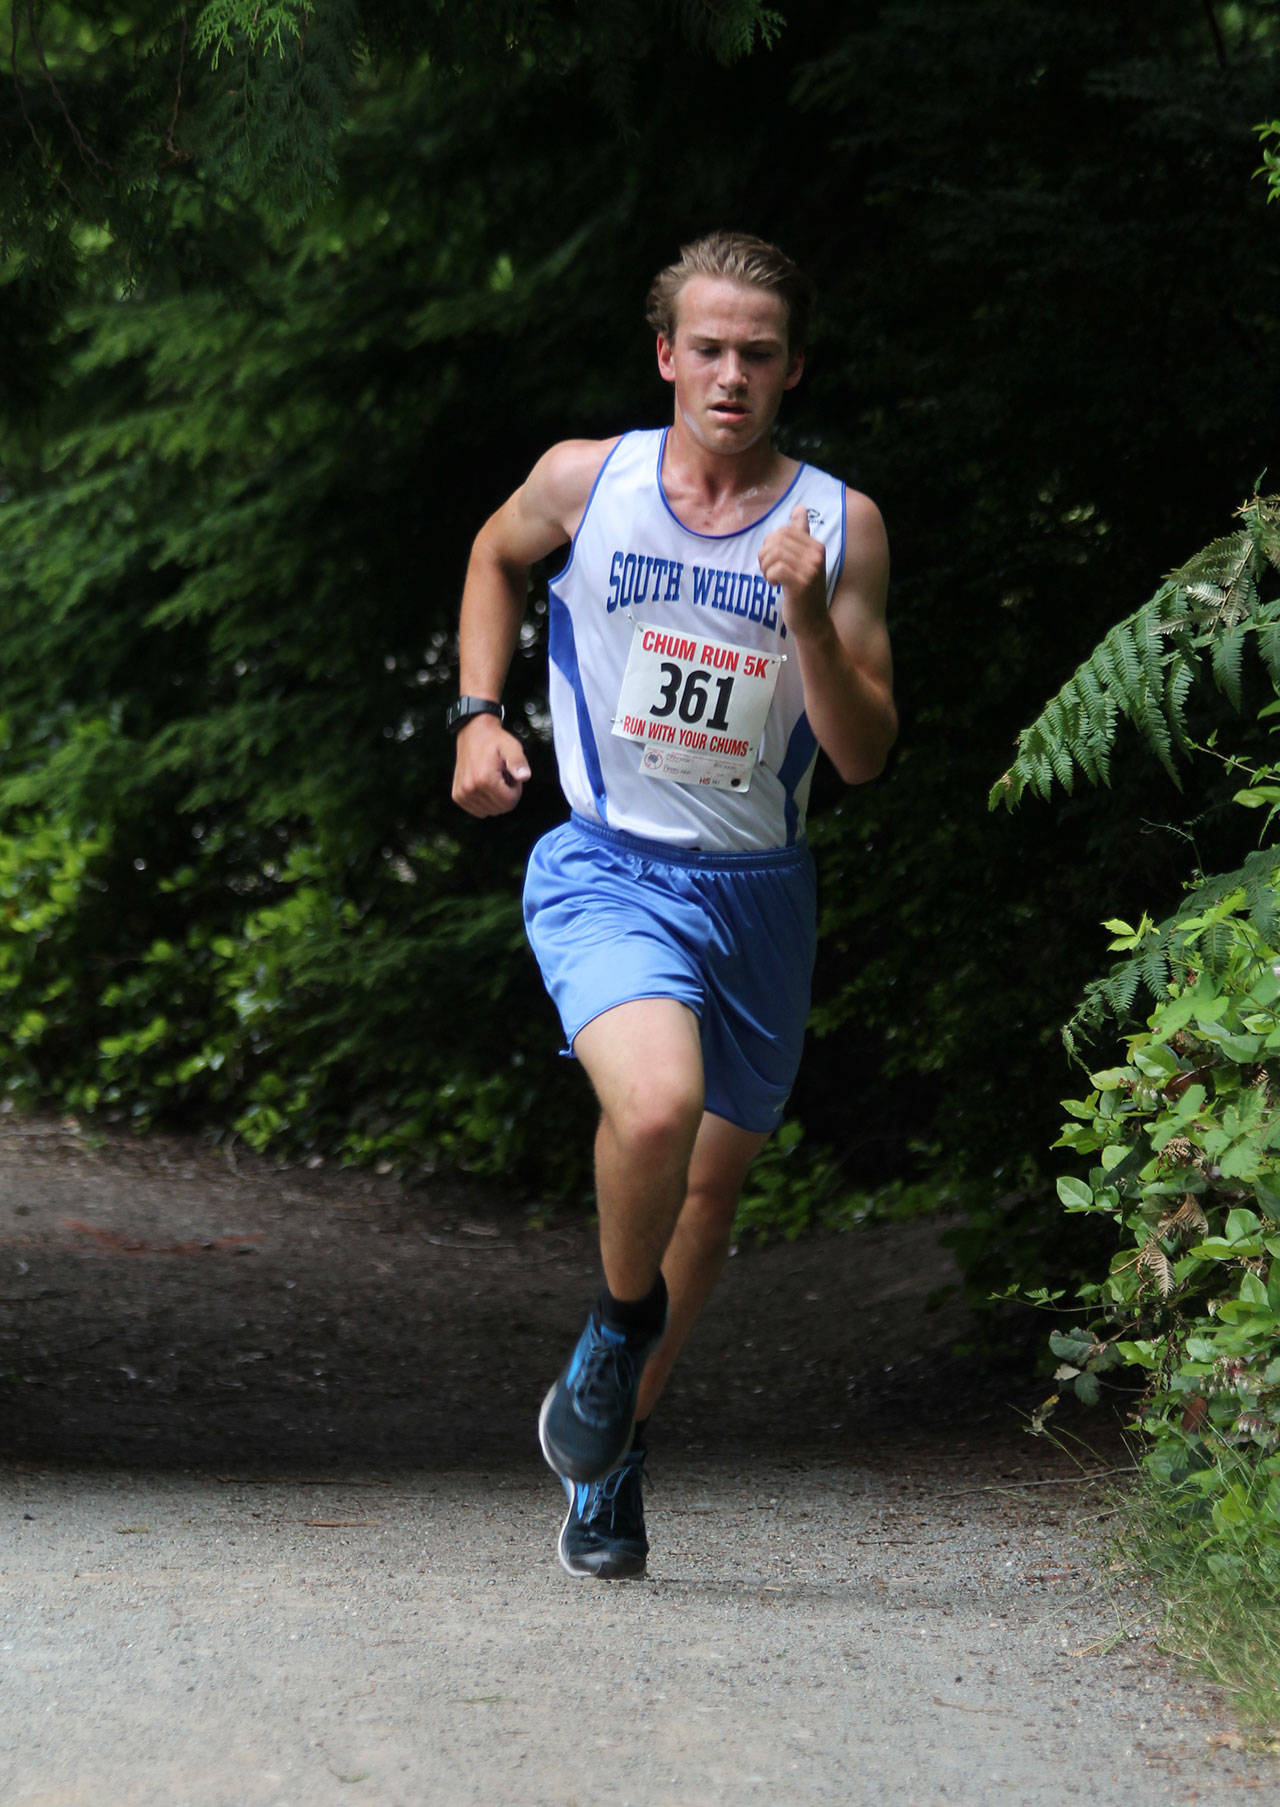 Michael Cepkowski, the Chum Run’s top finisher, zips through the course. (Photo by Jim Waller/South Whidbey Record)